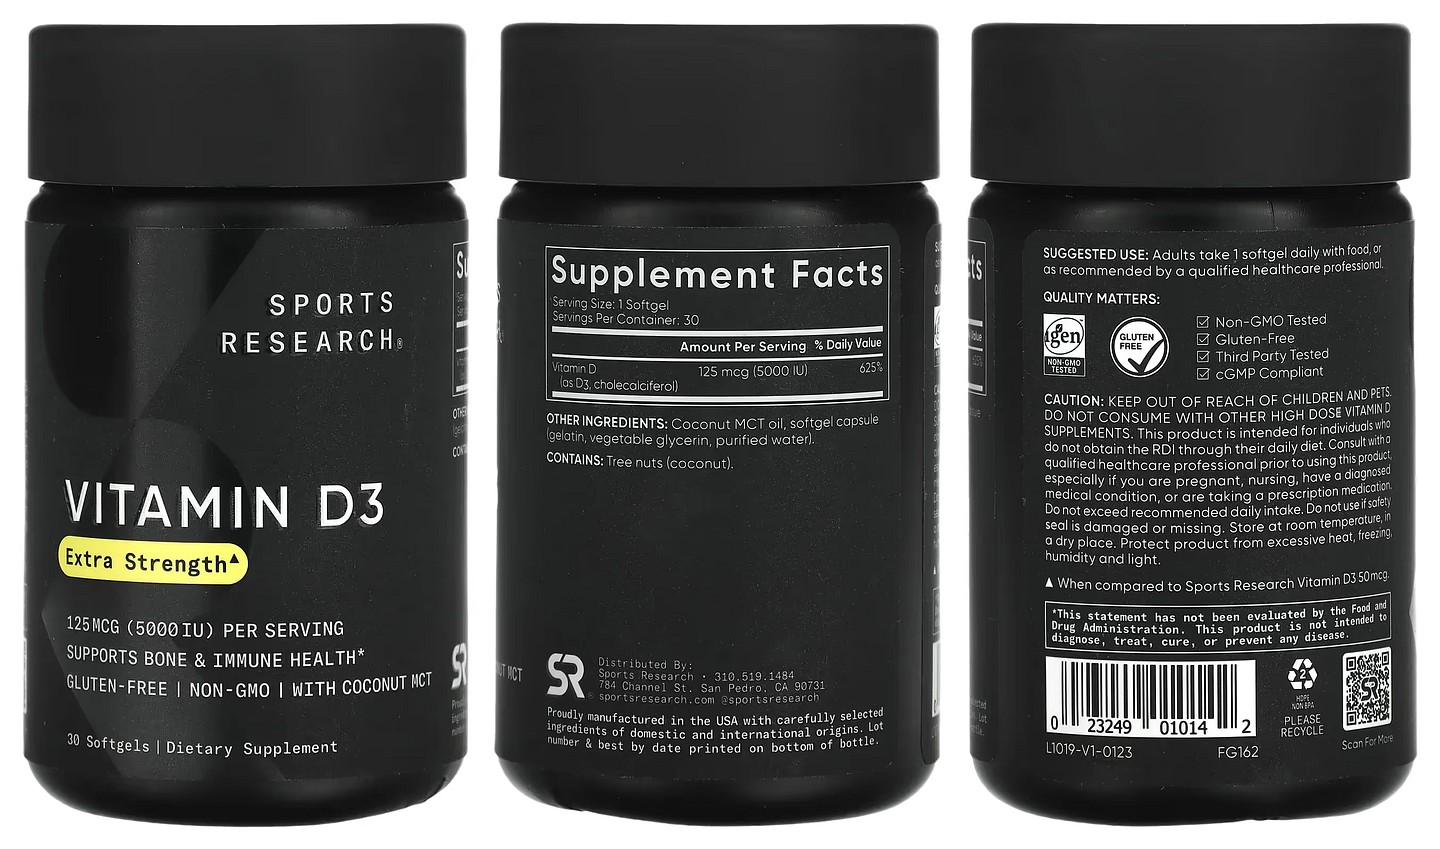 Sports Research, Vitamin D3 packaging